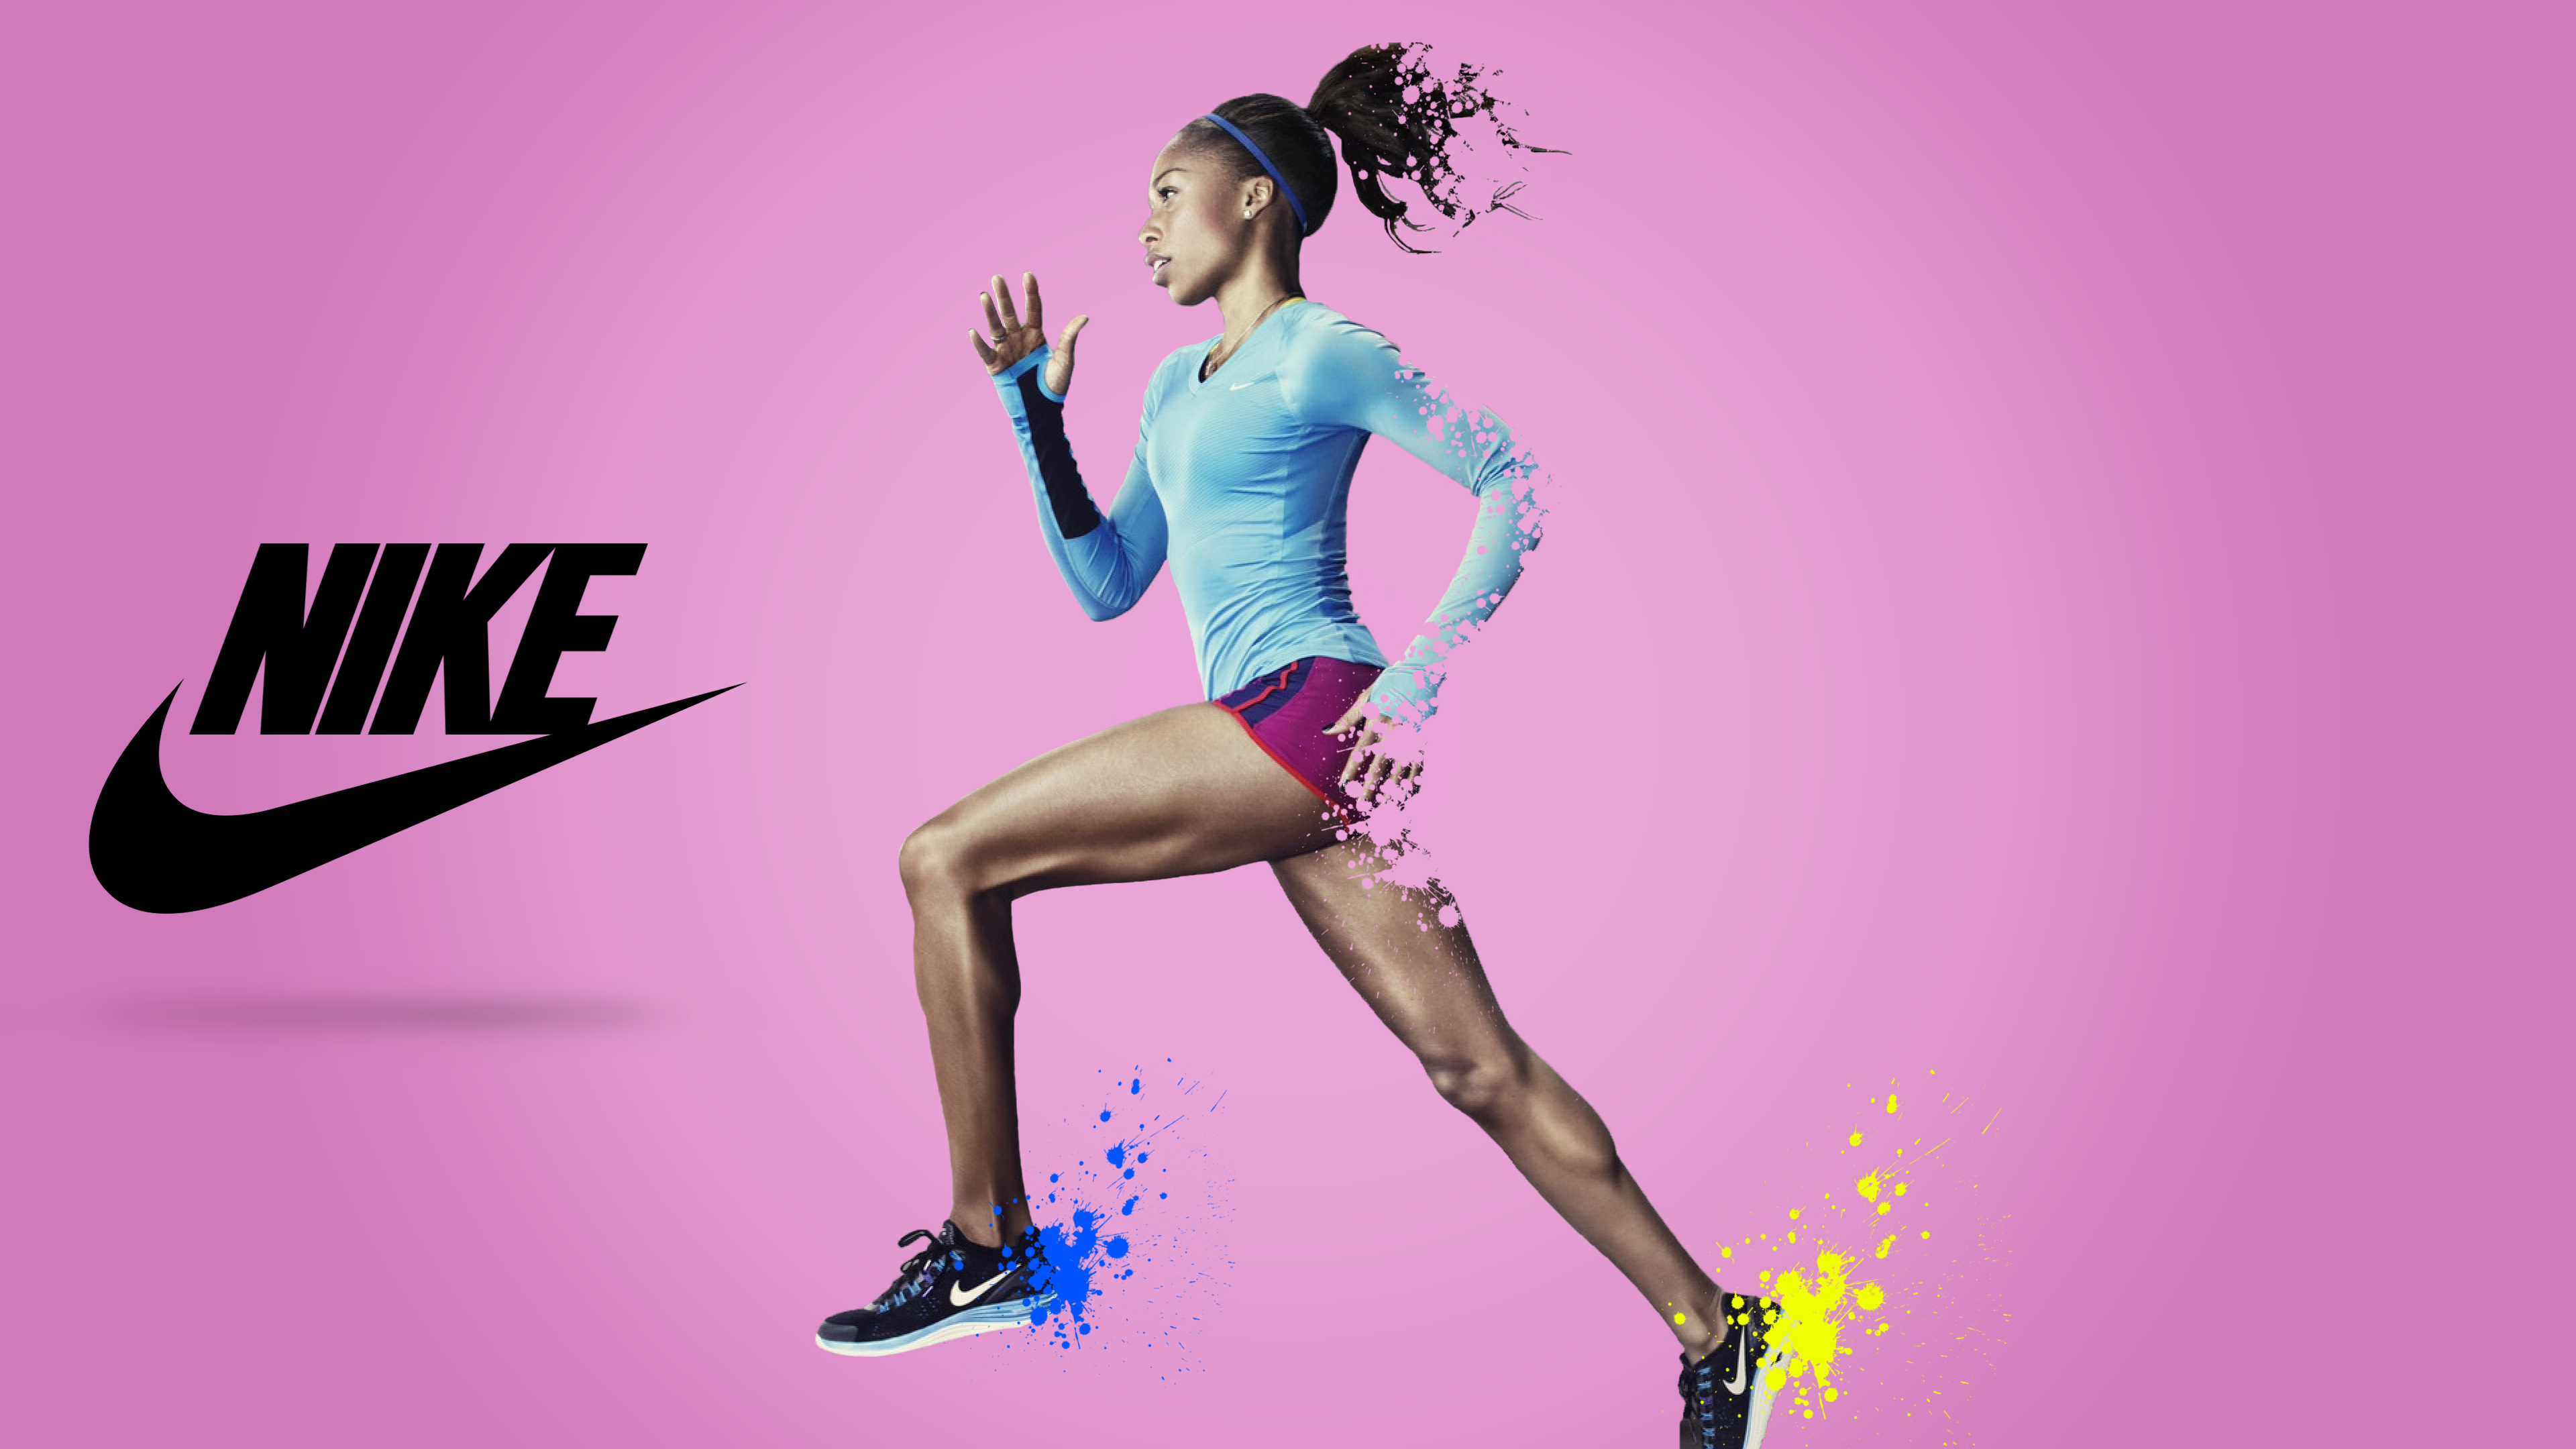 Wallpaper Nike, Running girl, , Sports,. Wallpaper for iPhone, Android, Mobile and Desktop